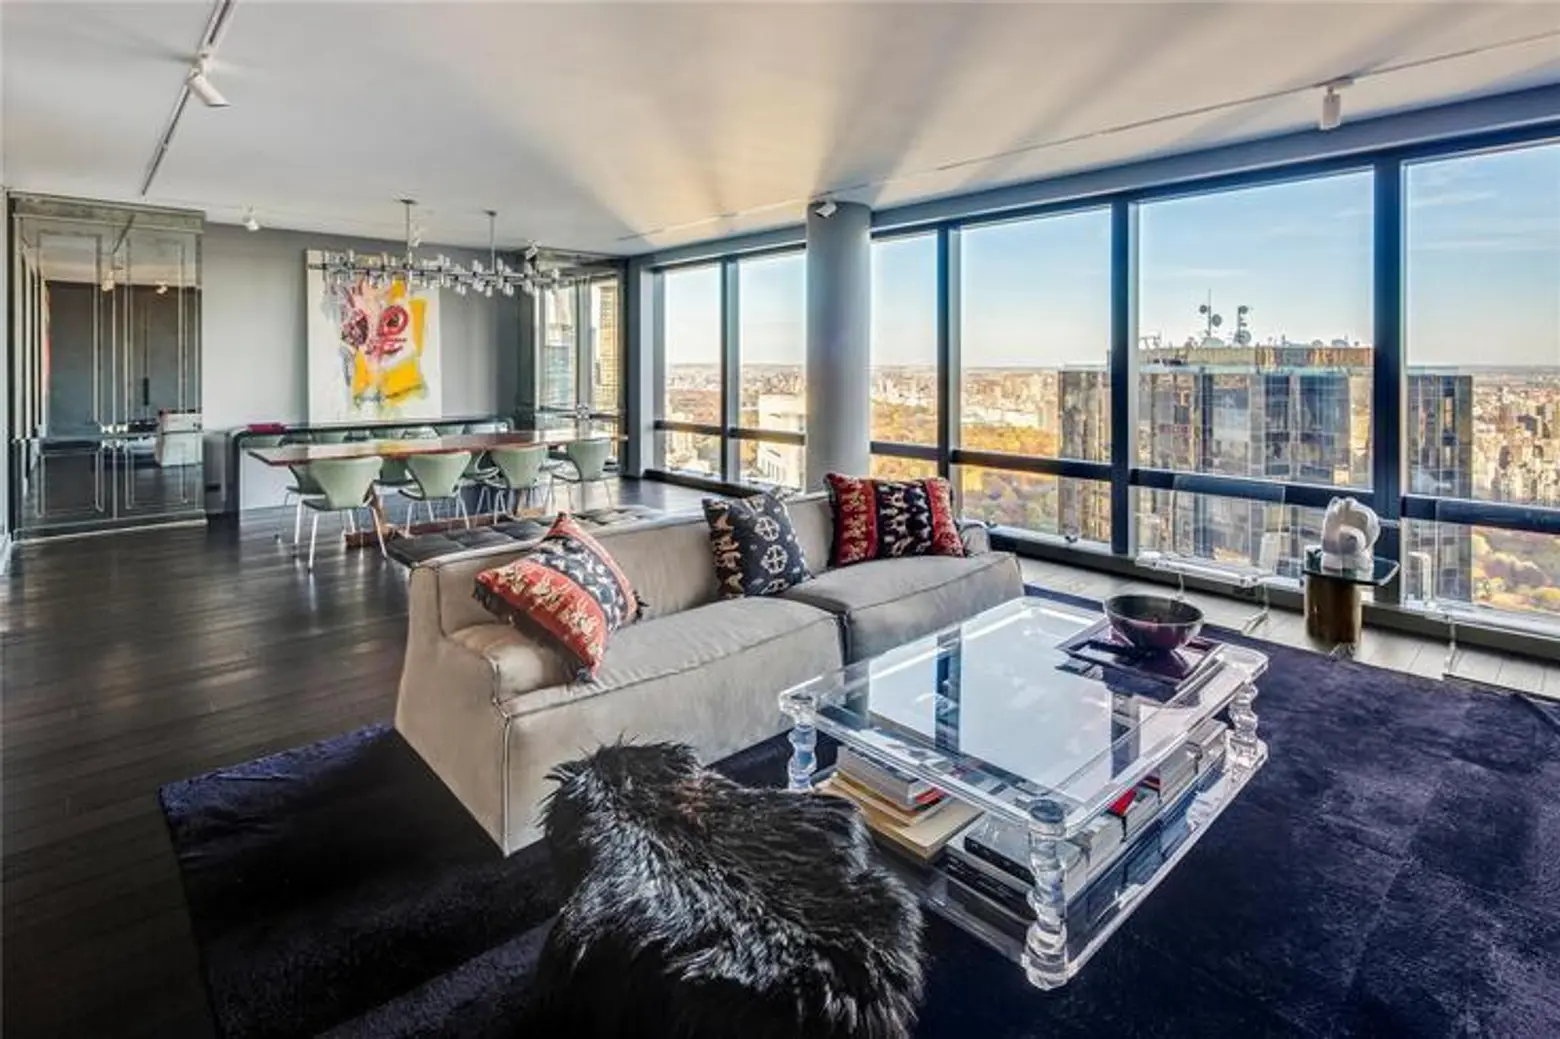 This Gorgeous Apartment at the Mandarin Oriental Gives New Meaning to “Movin’ On Up”